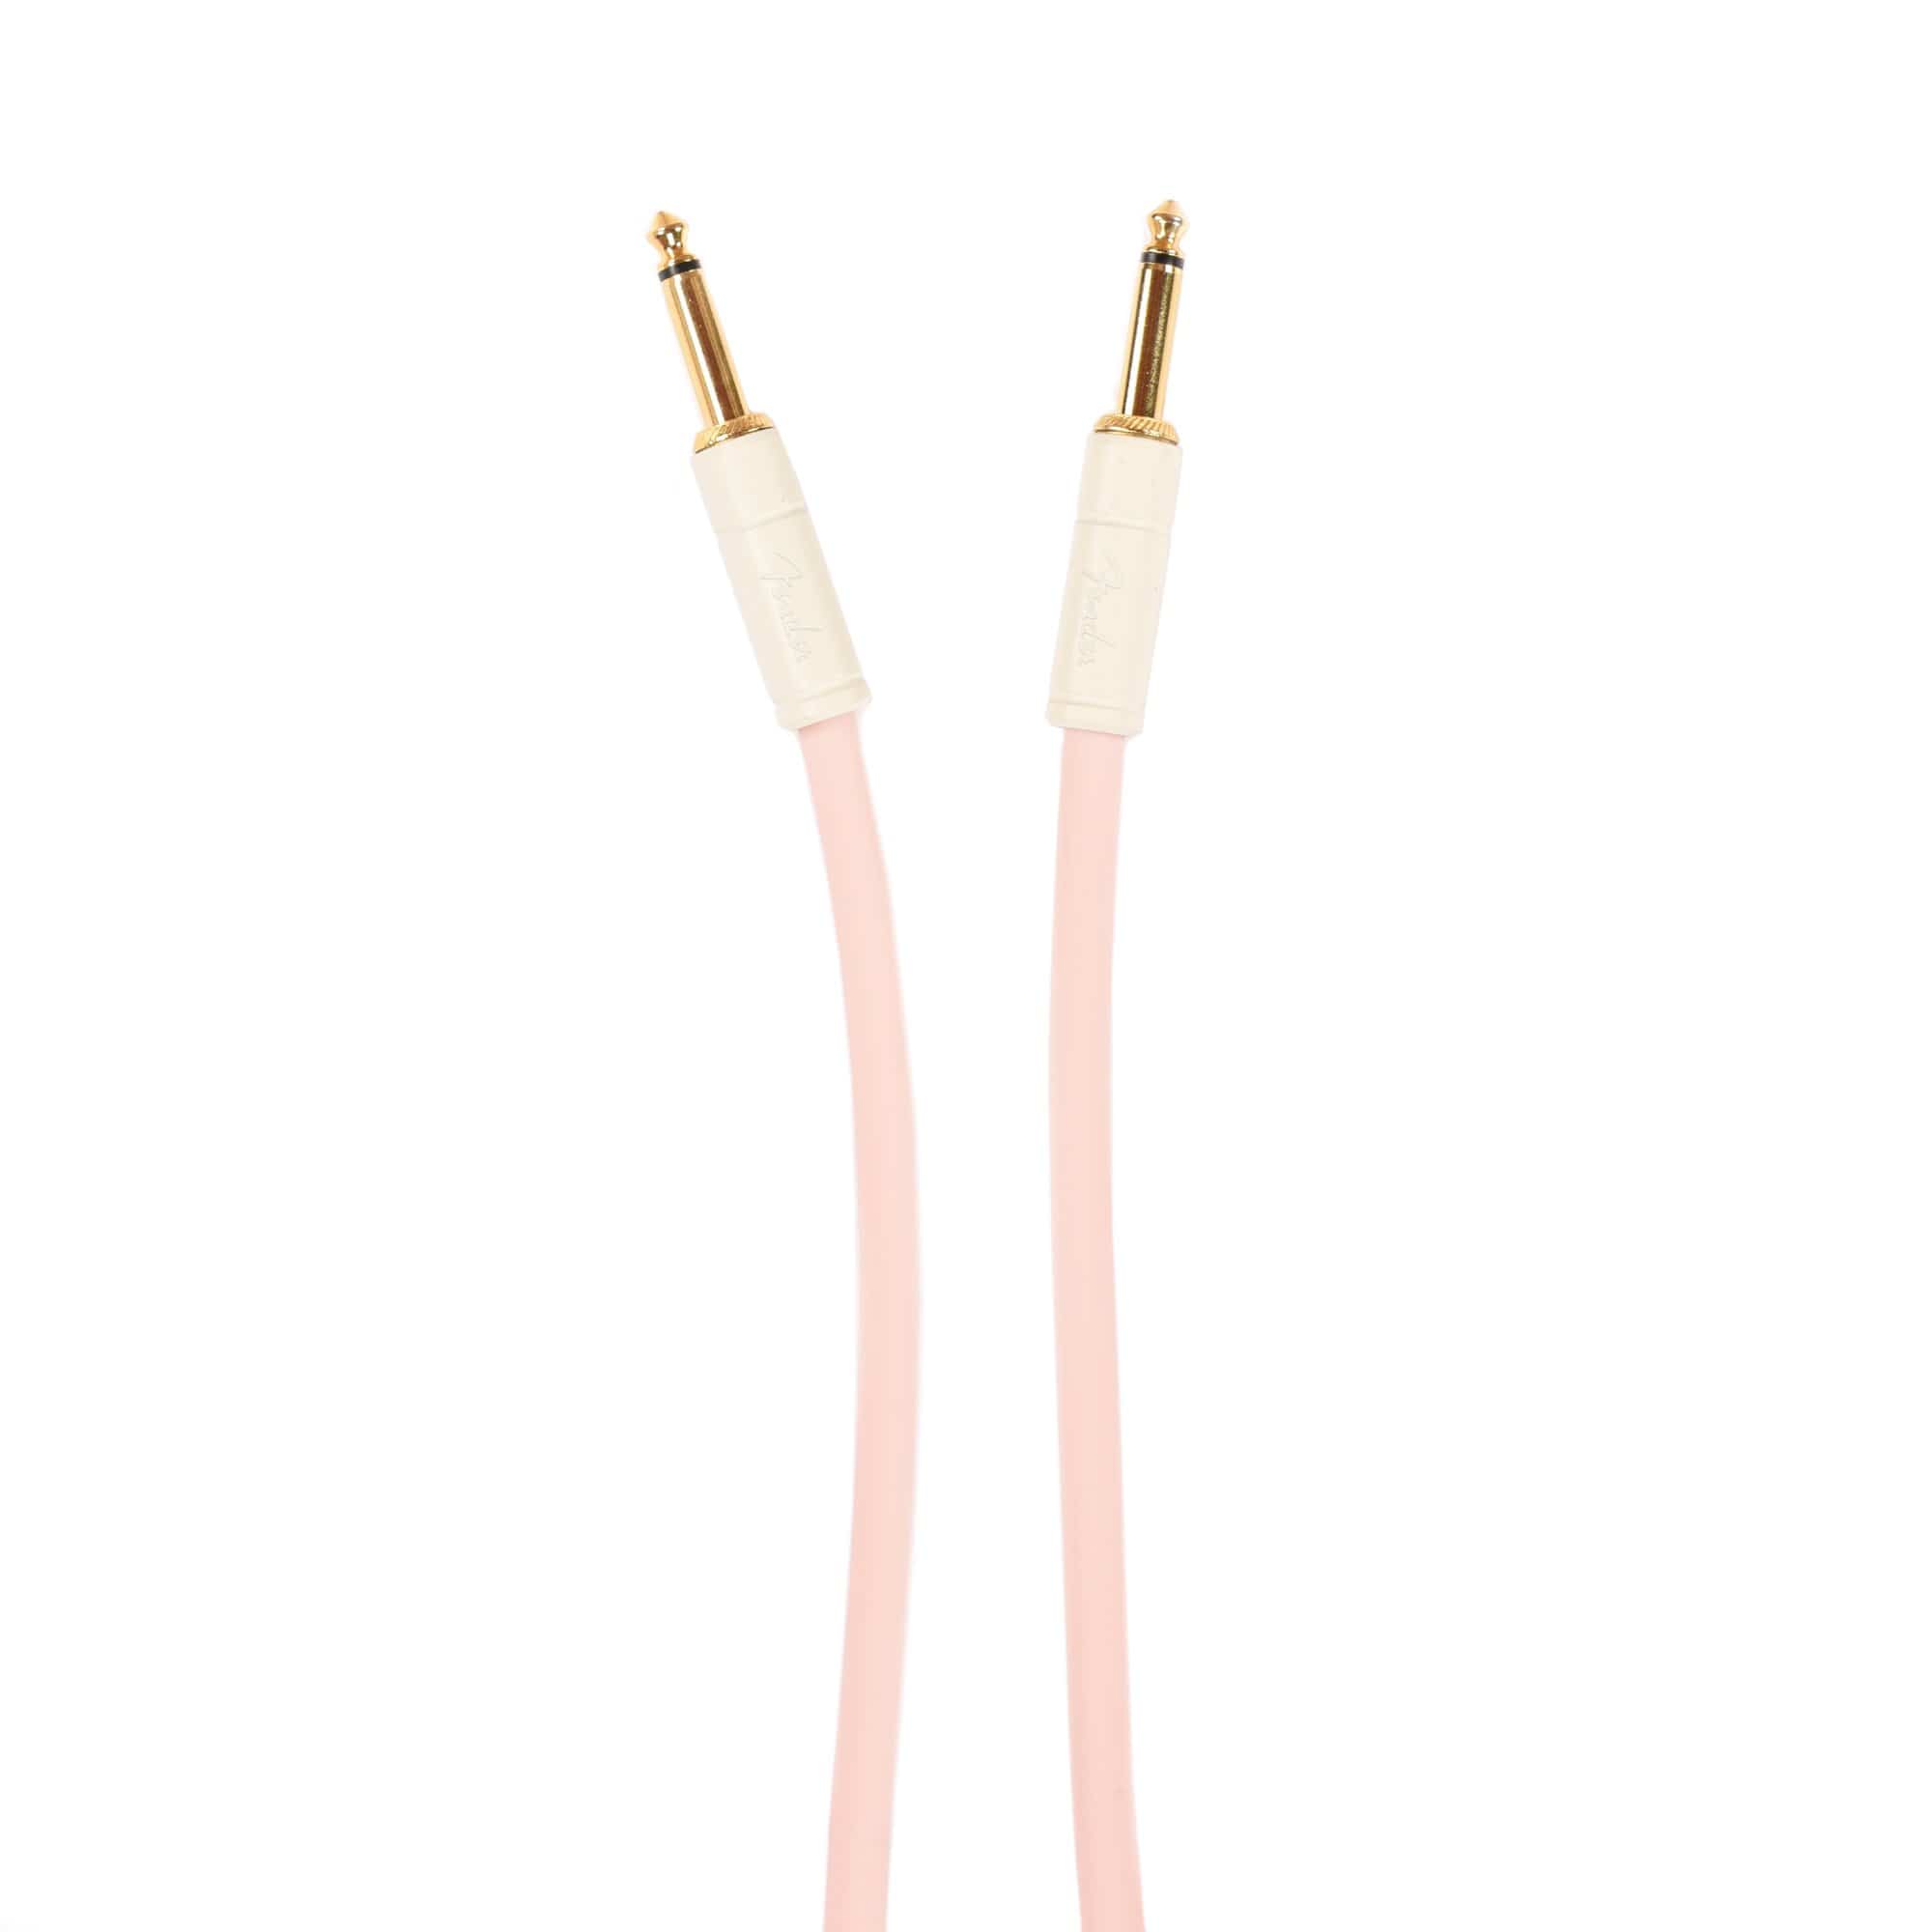 Fender Deluxe Instrument Cable Shell Pink 10' Straight-Straight